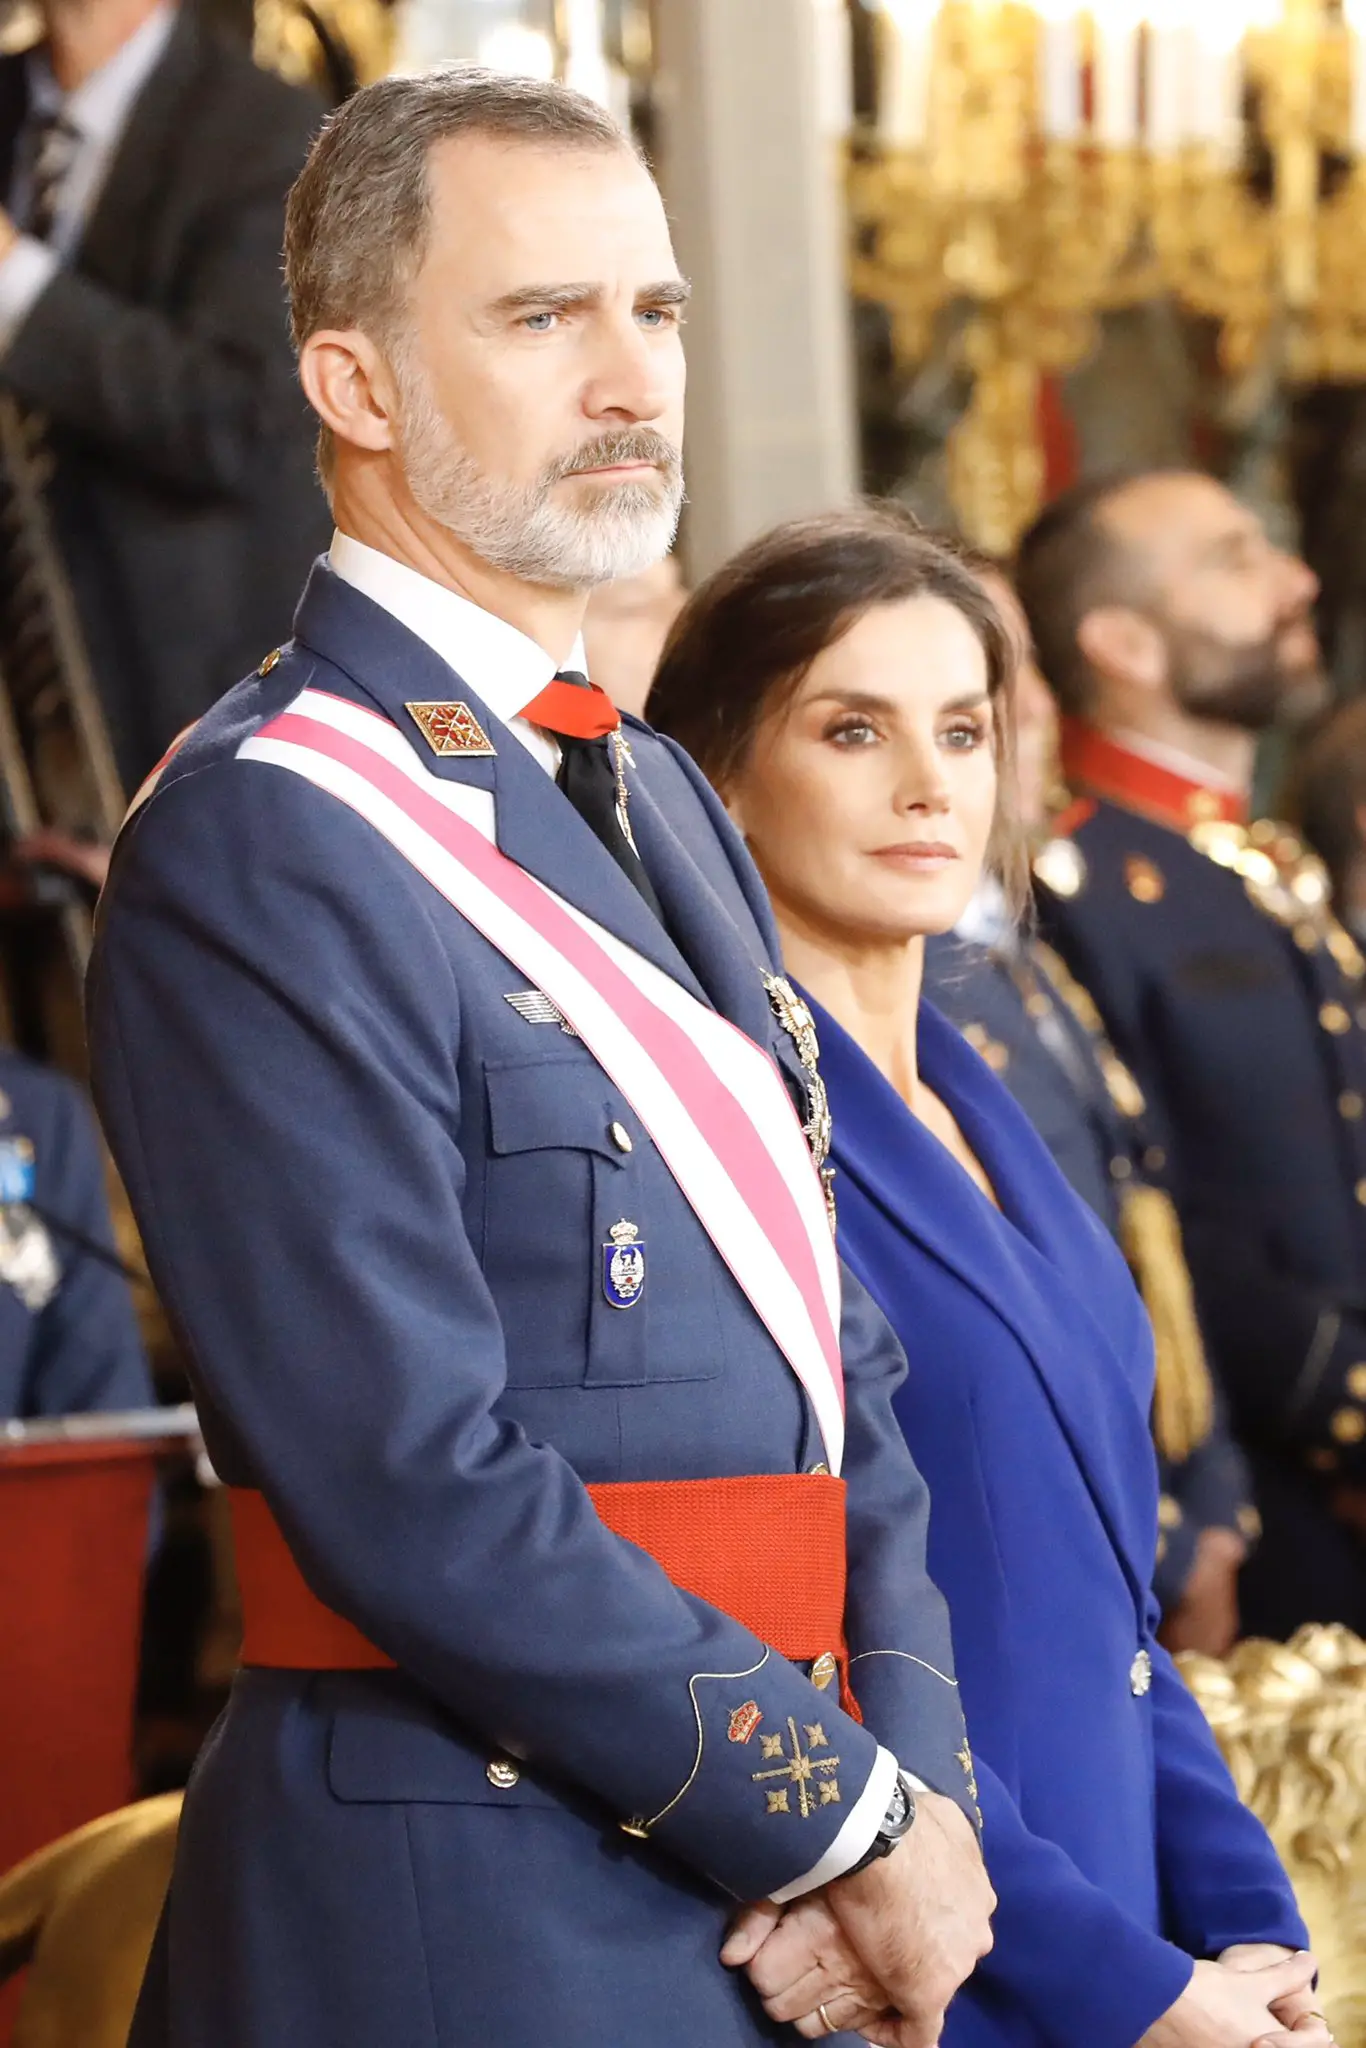 King Felipe and Queen Letizia at the Royal Palace in Madrid at the annual Military Service Reception